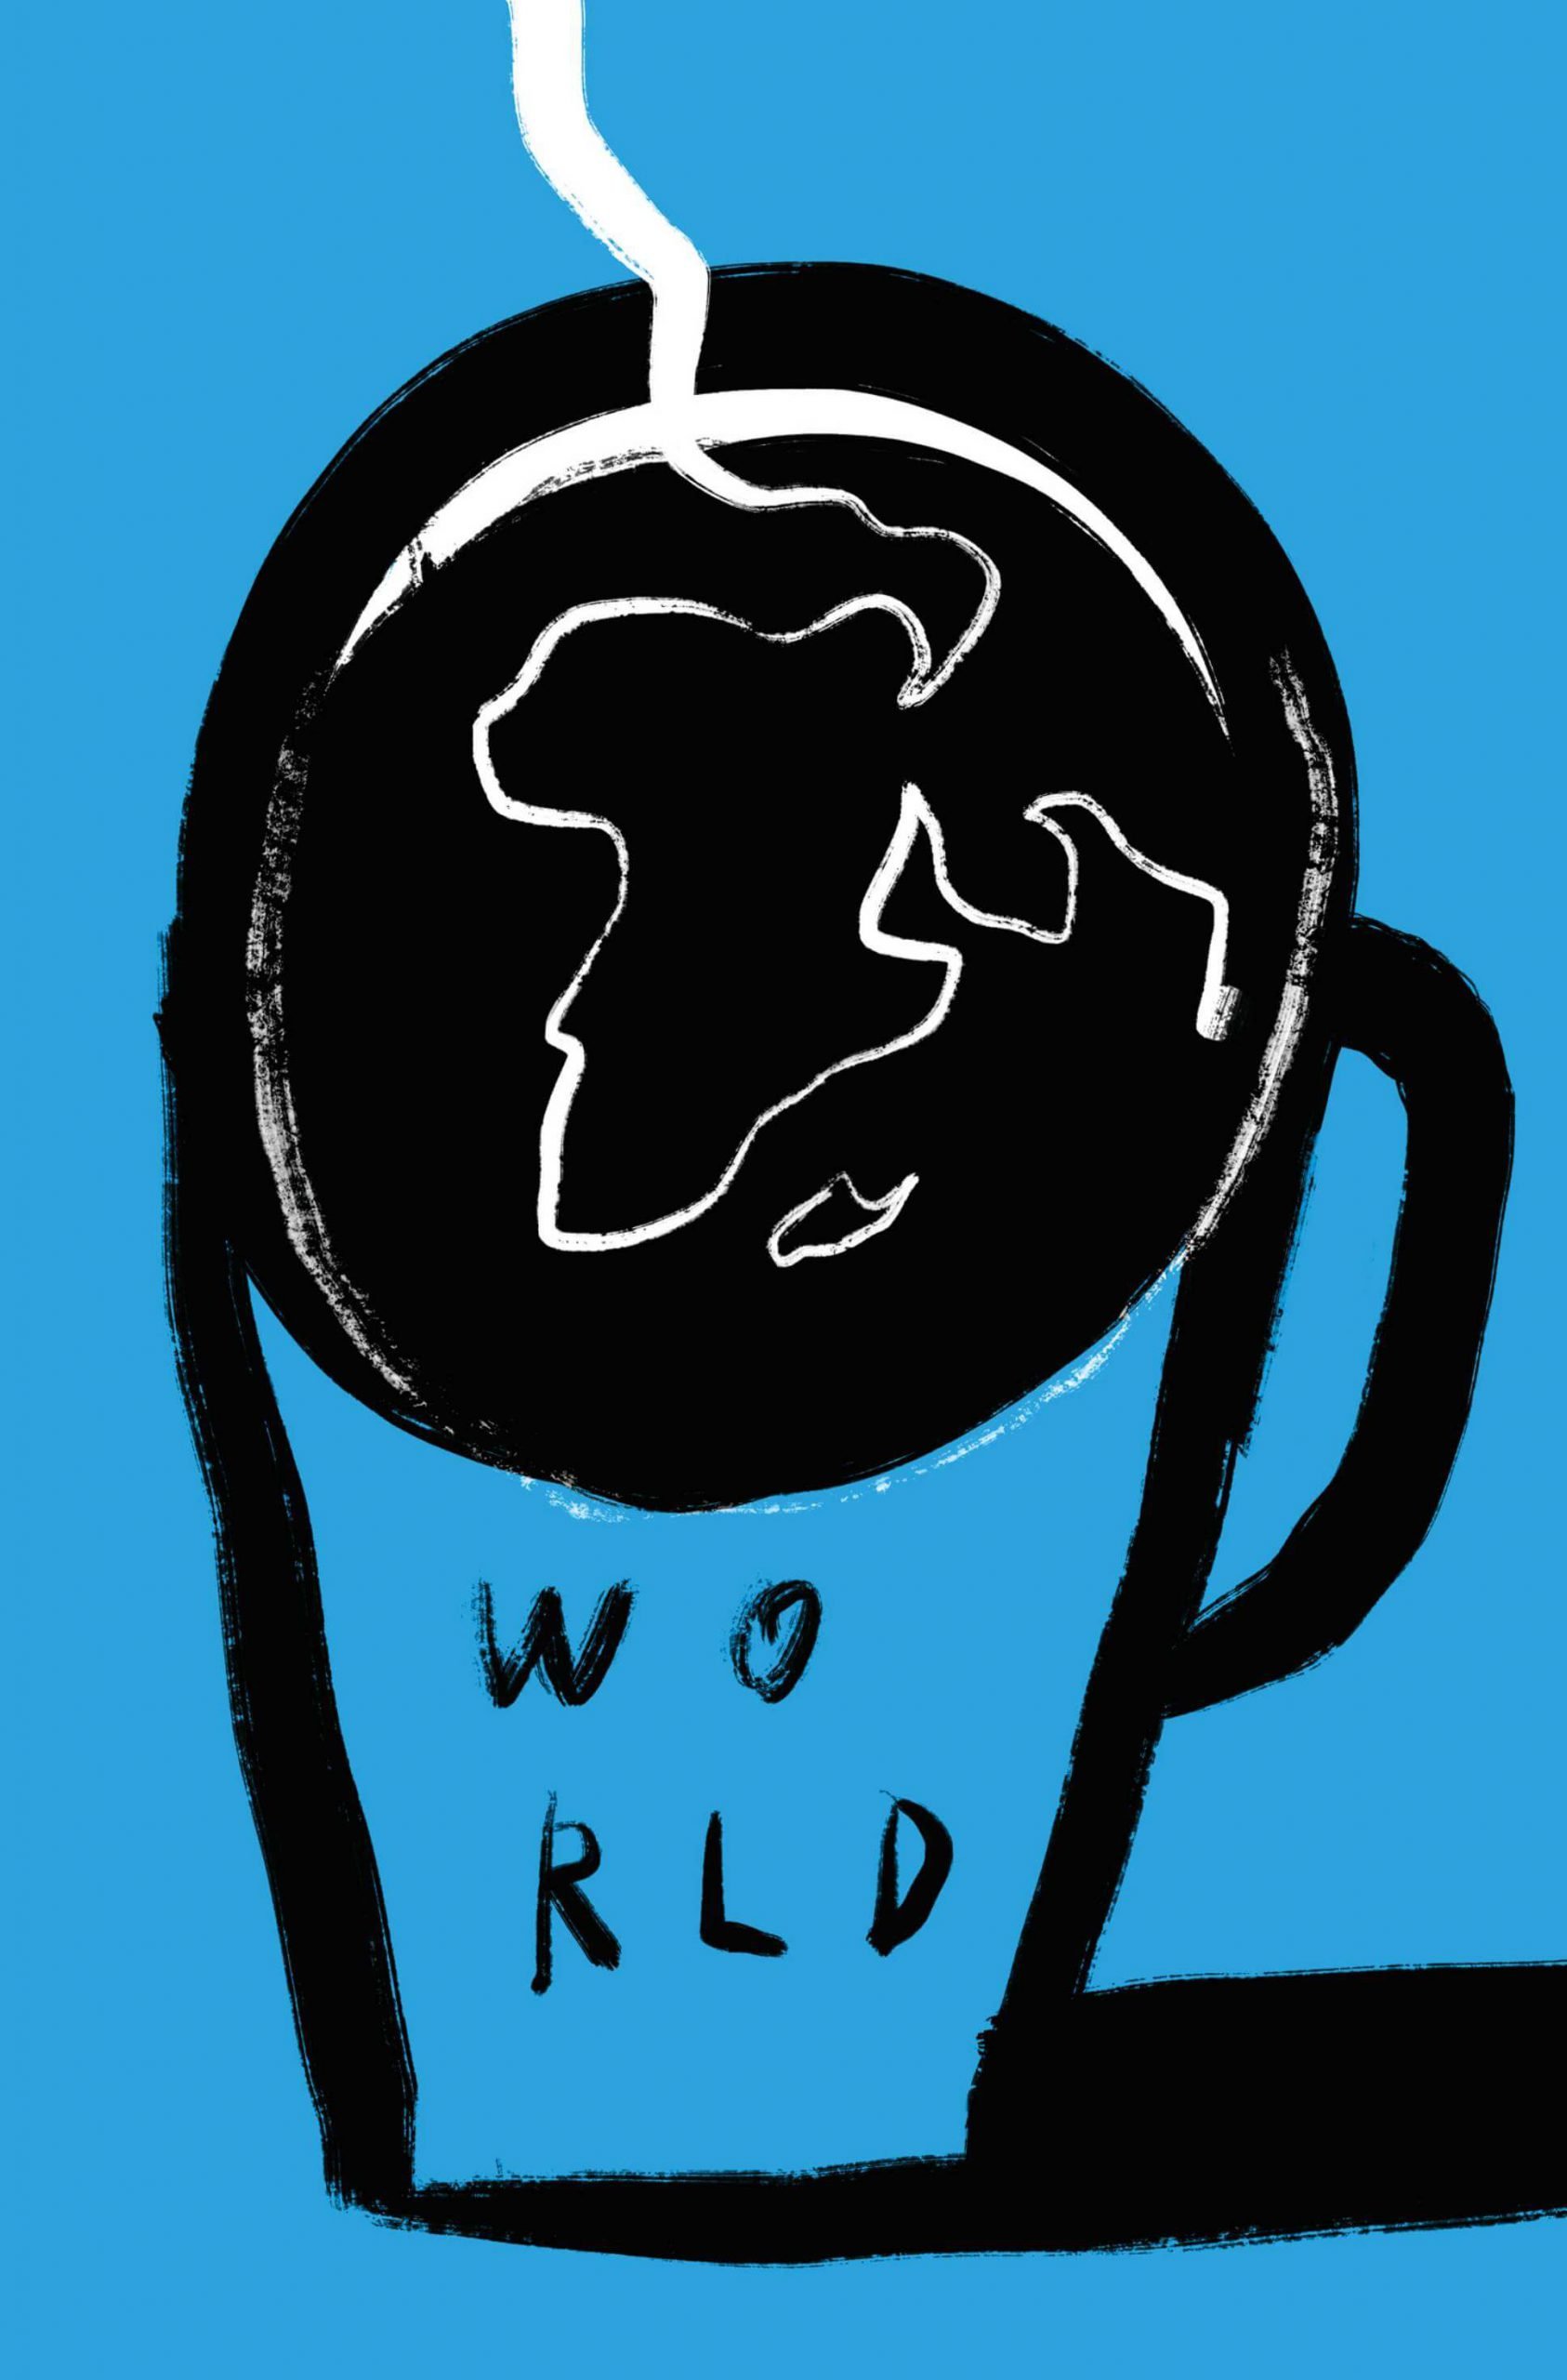 Illustration of the world in a cup of coffee